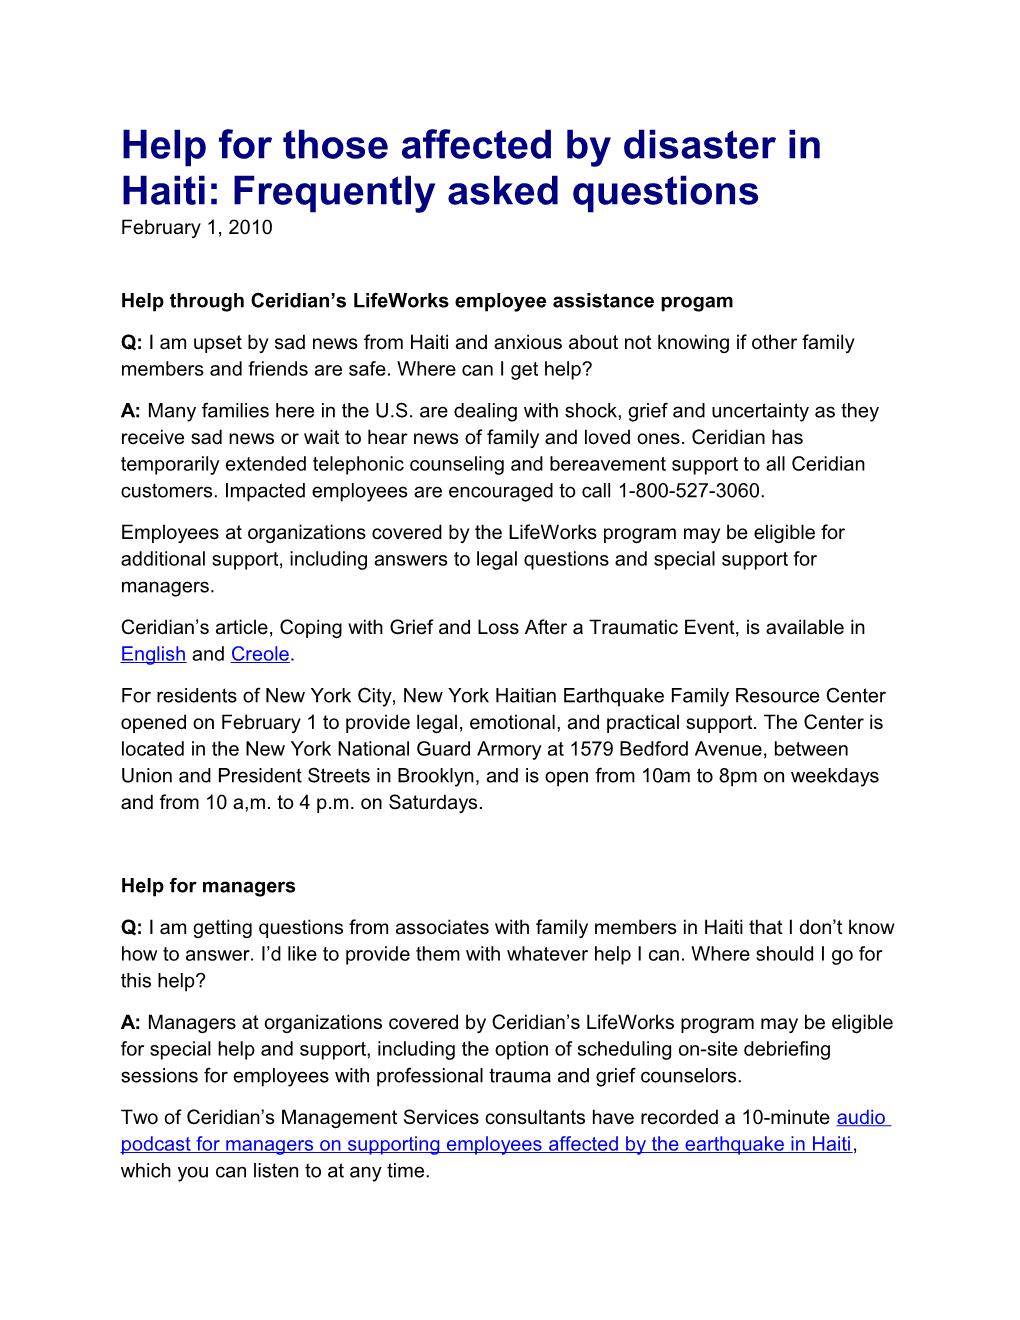 Help for Those Affected by Disaster in Haiti: Frequently Asked Questions